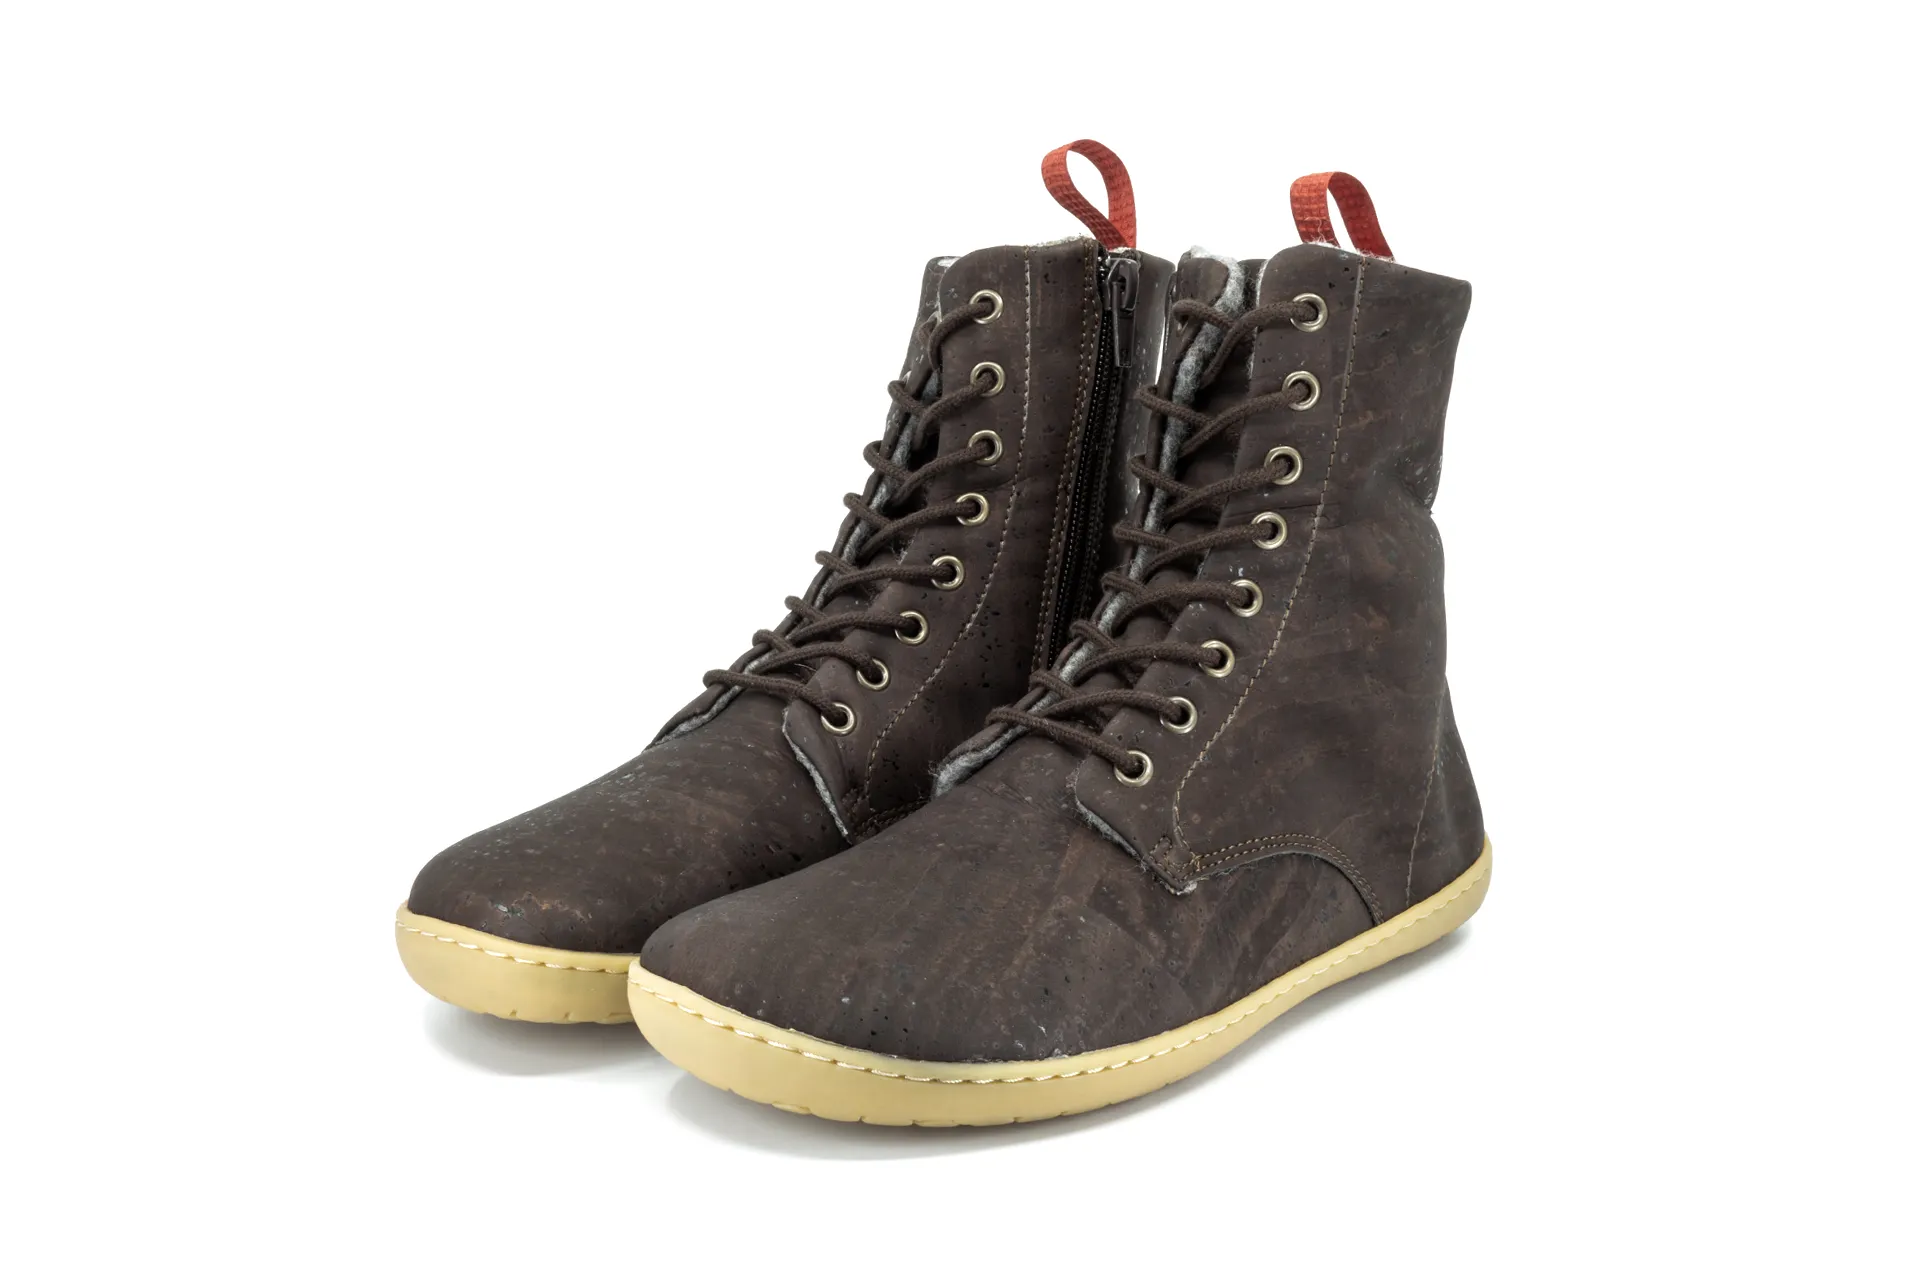 Mukishoes Quercus Brown winter boots